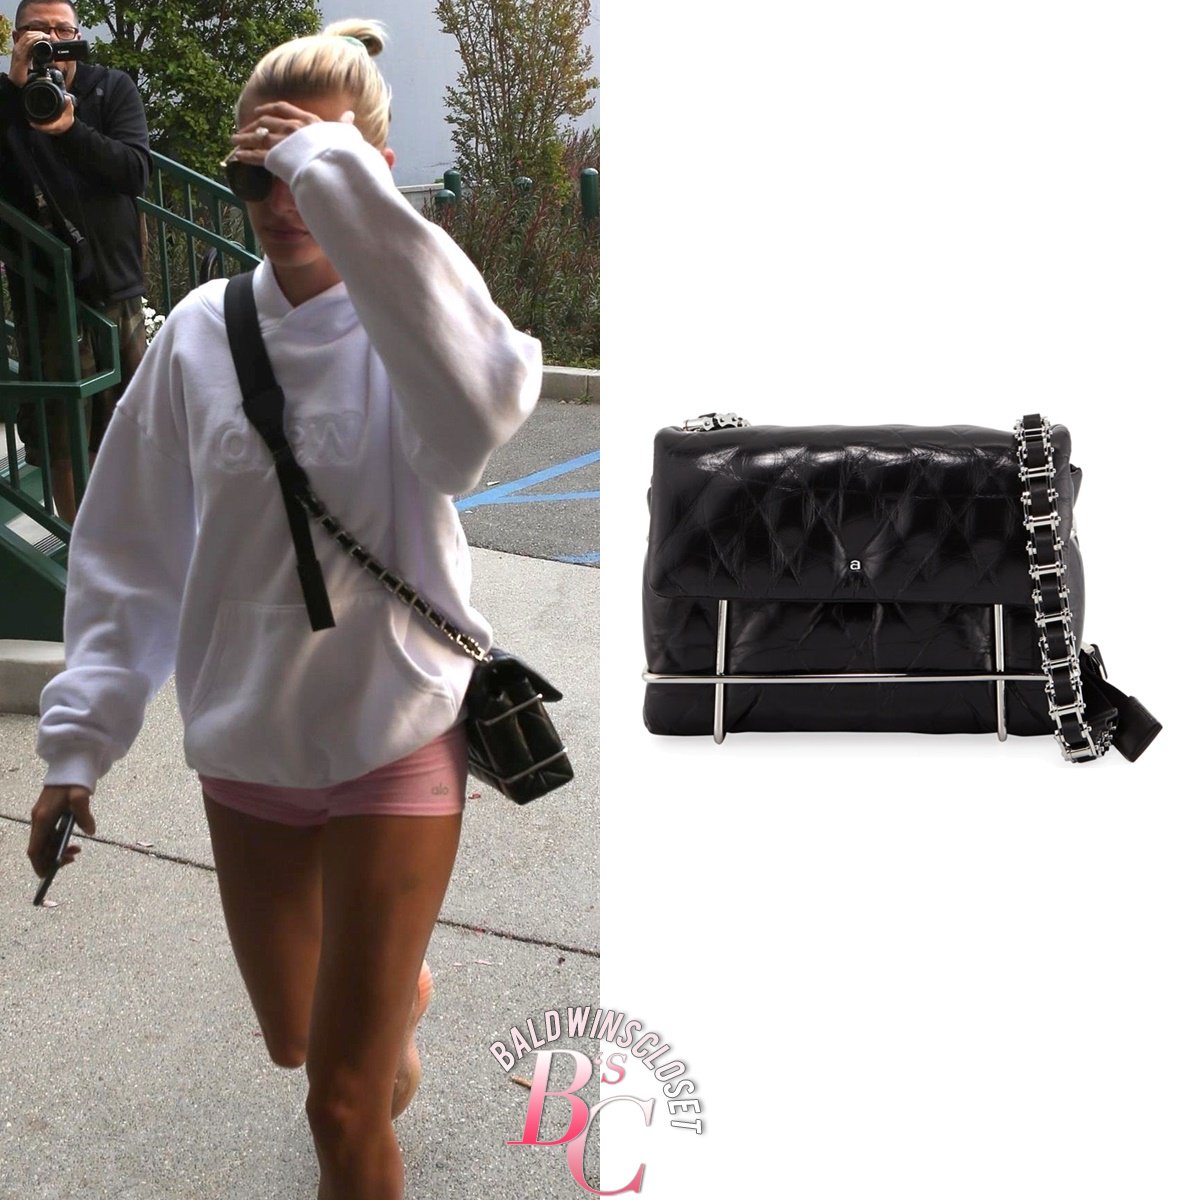 Hailey Bieber's Closet on X: February 26, 2021 - #HaileyBieber showed off  her gorgeous #Versace La Medusa Small Bag in Black for $1,695.00. She is  such a supportive wifey. She put a #